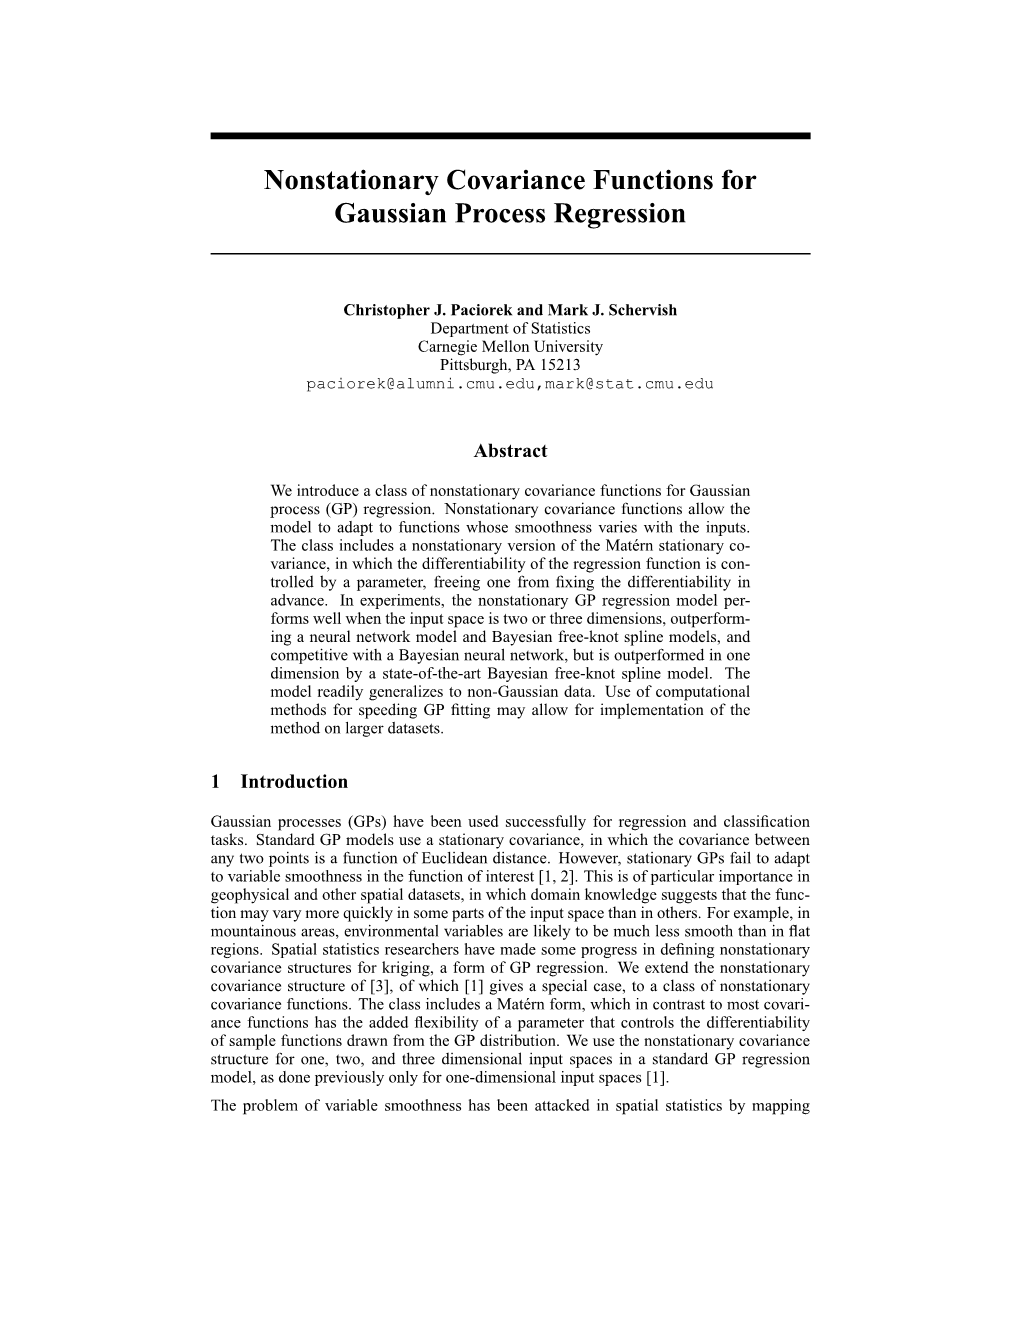 Nonstationary Covariance Functions for Gaussian Process Regression